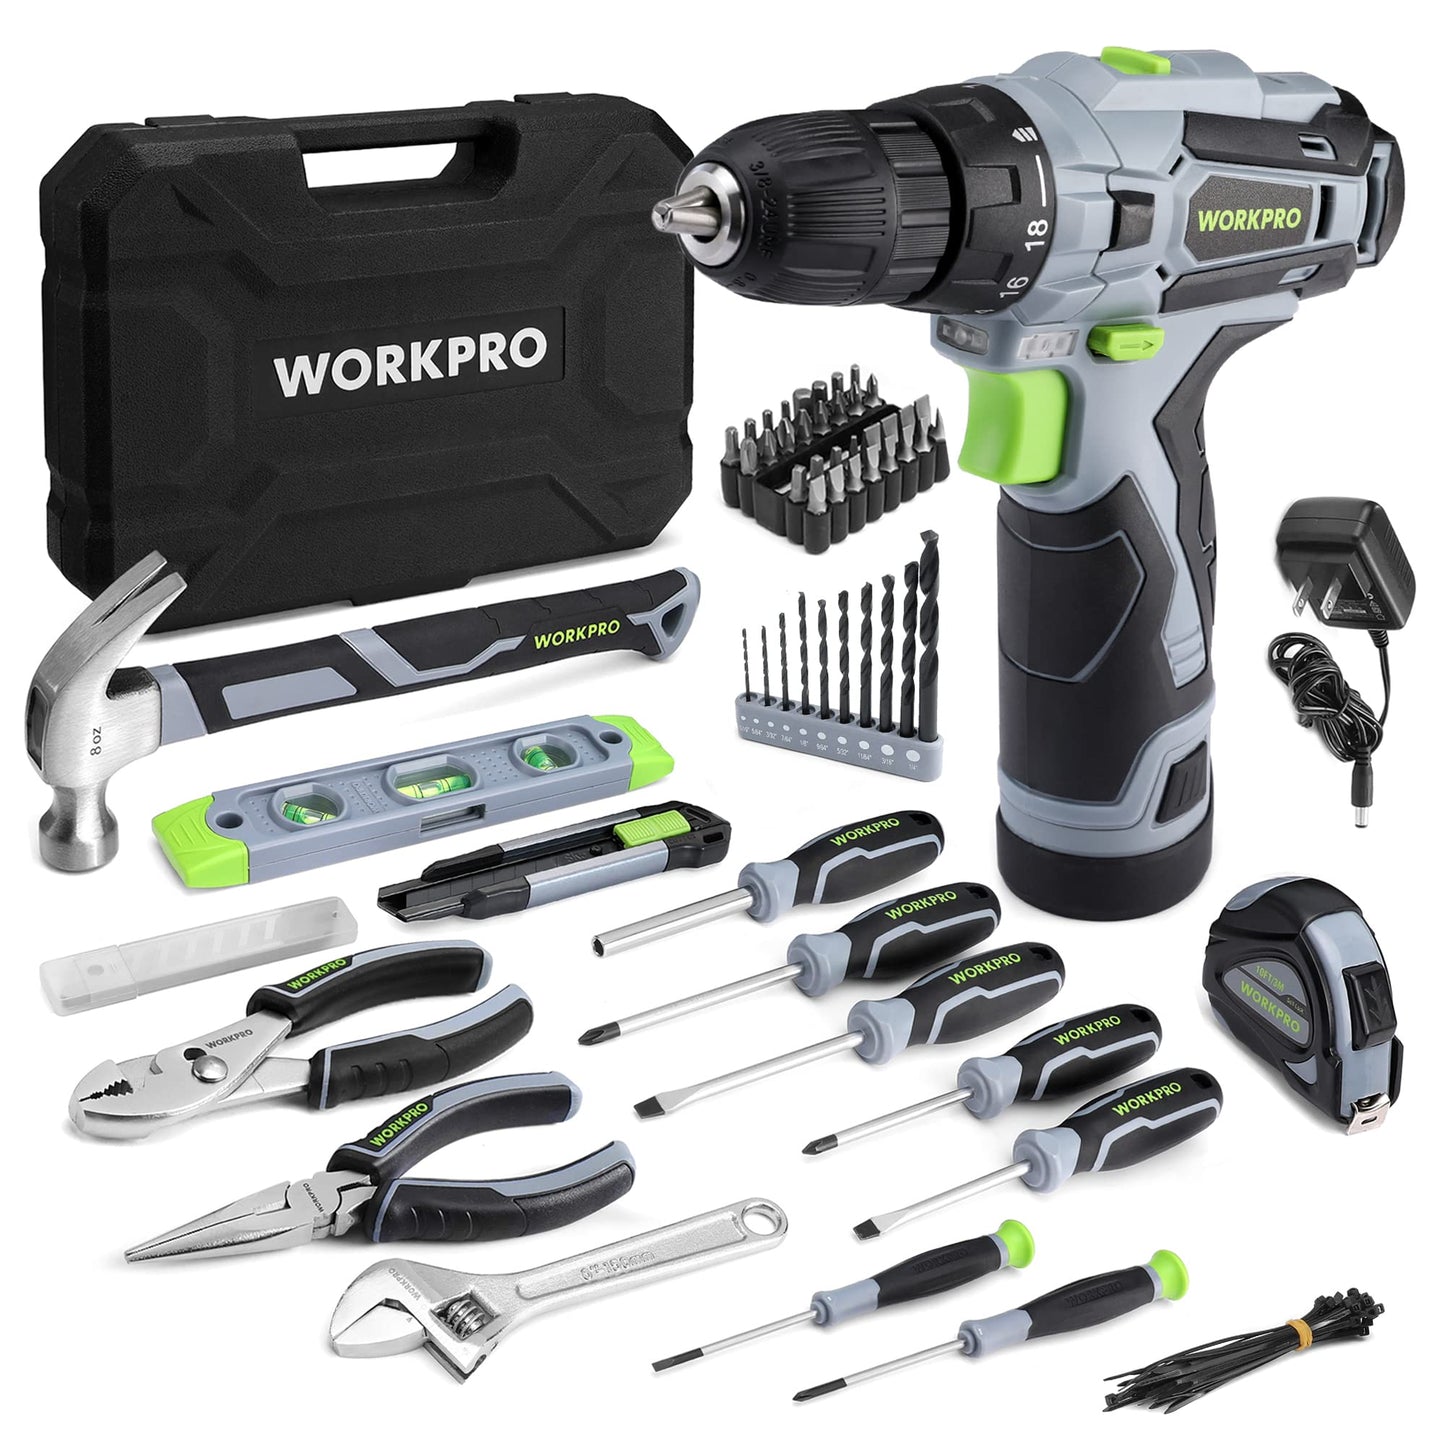 WORKPRO Home Tool Kit with Power Drill, 108PCS Power Home Tool Set with 12V 1.5 Ah Battery Powered Screwdriver and Tool Box, Electric Cordless Drill